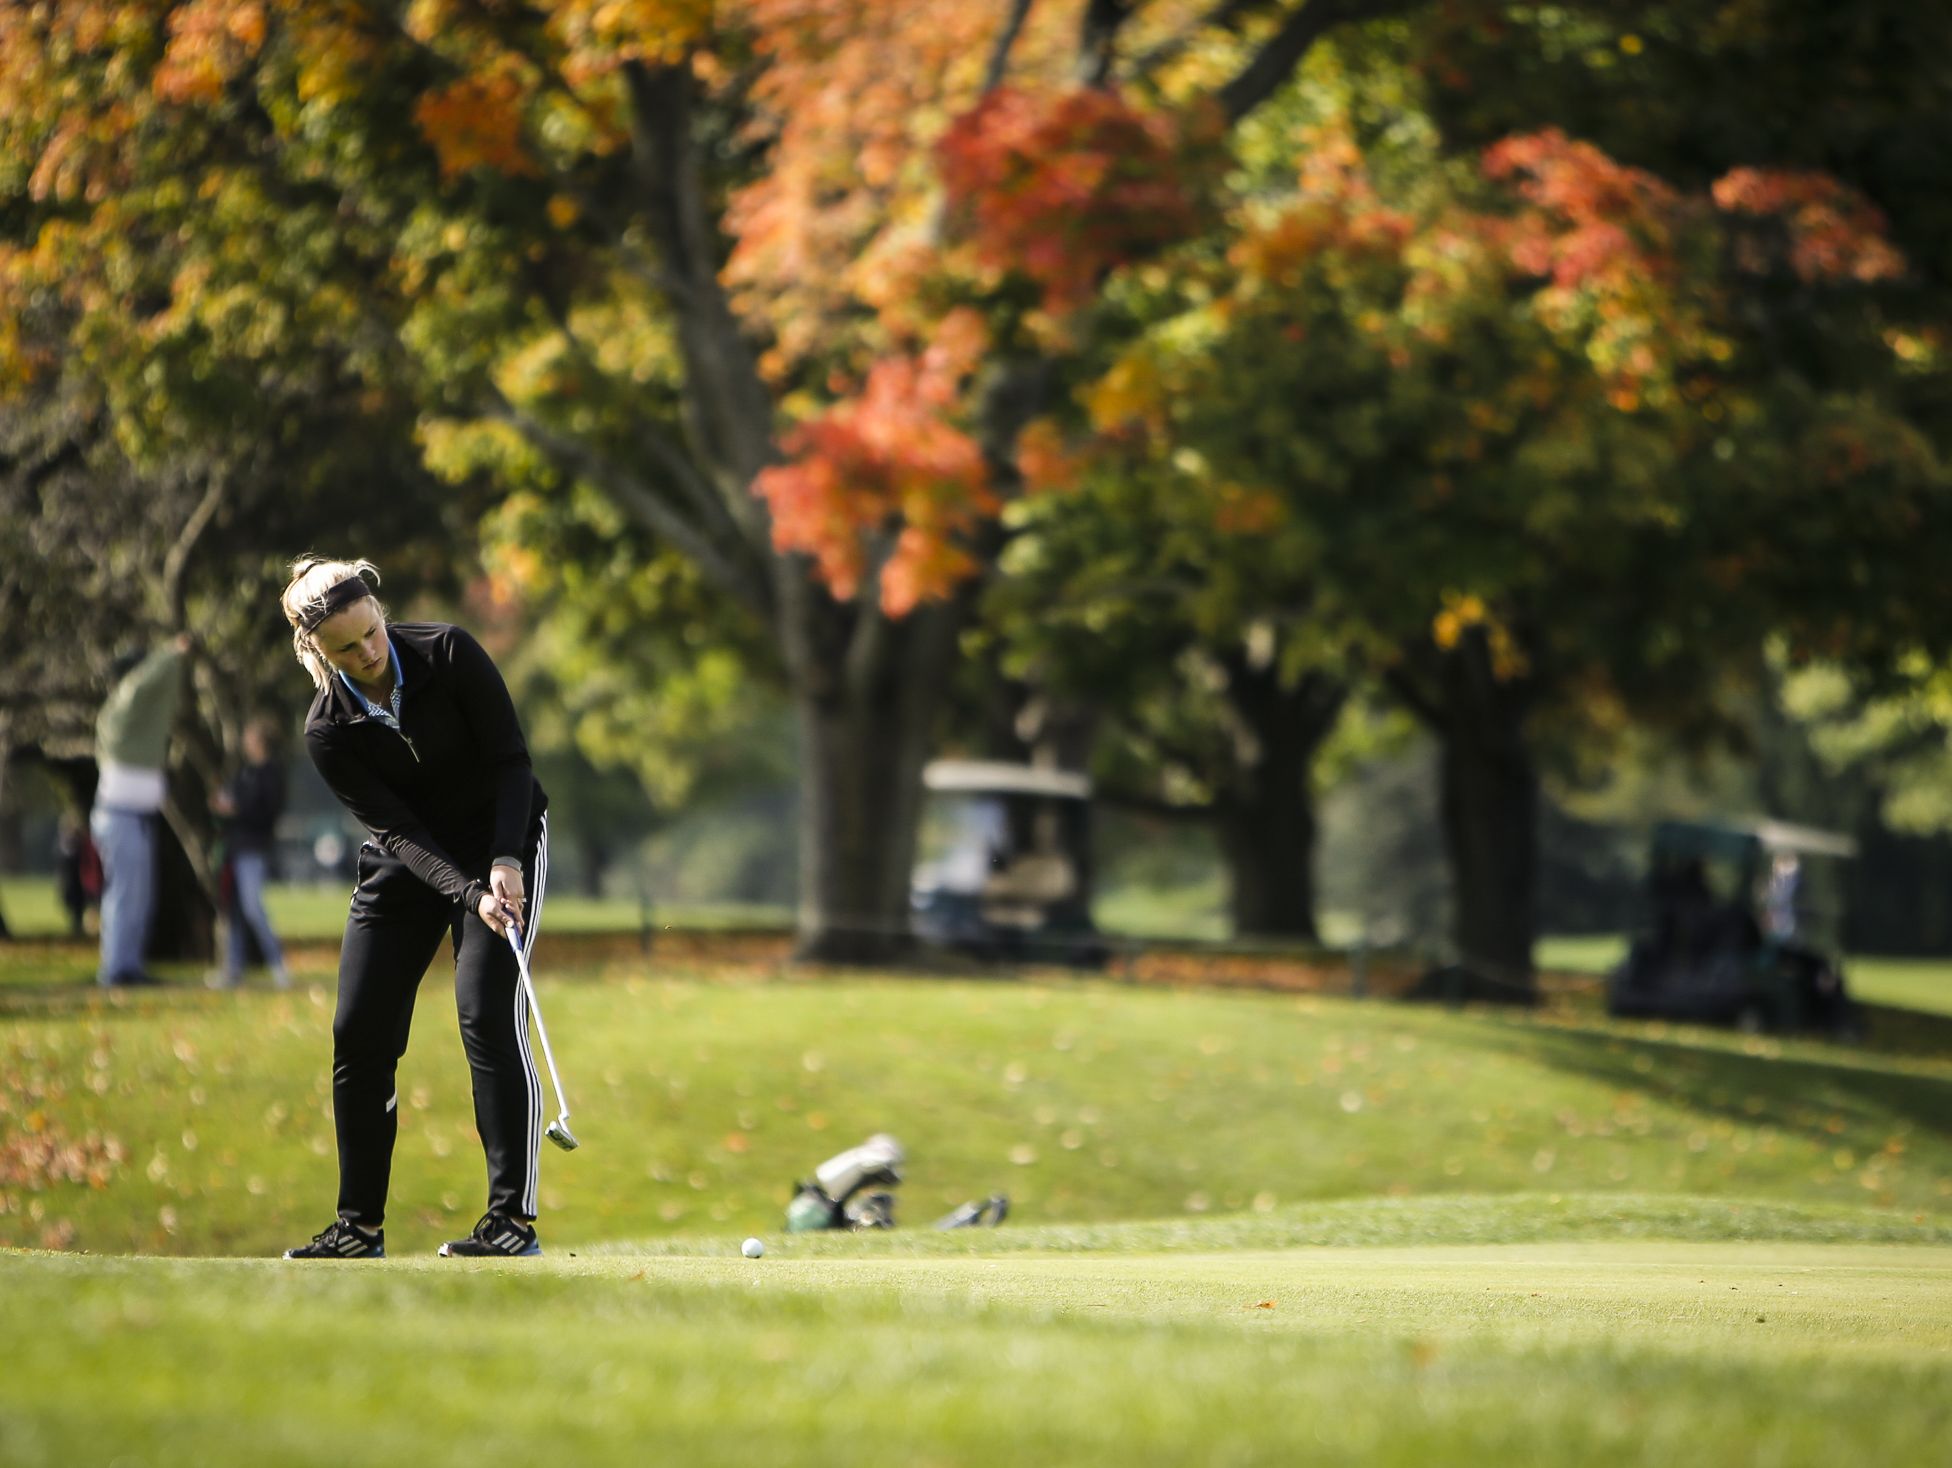 Lansing Catholic senior Abigail Meder works the fourth green during the Div. 4 Girls Golf Finals October 15, 2016, at Forest Akers West at Michigan State University.